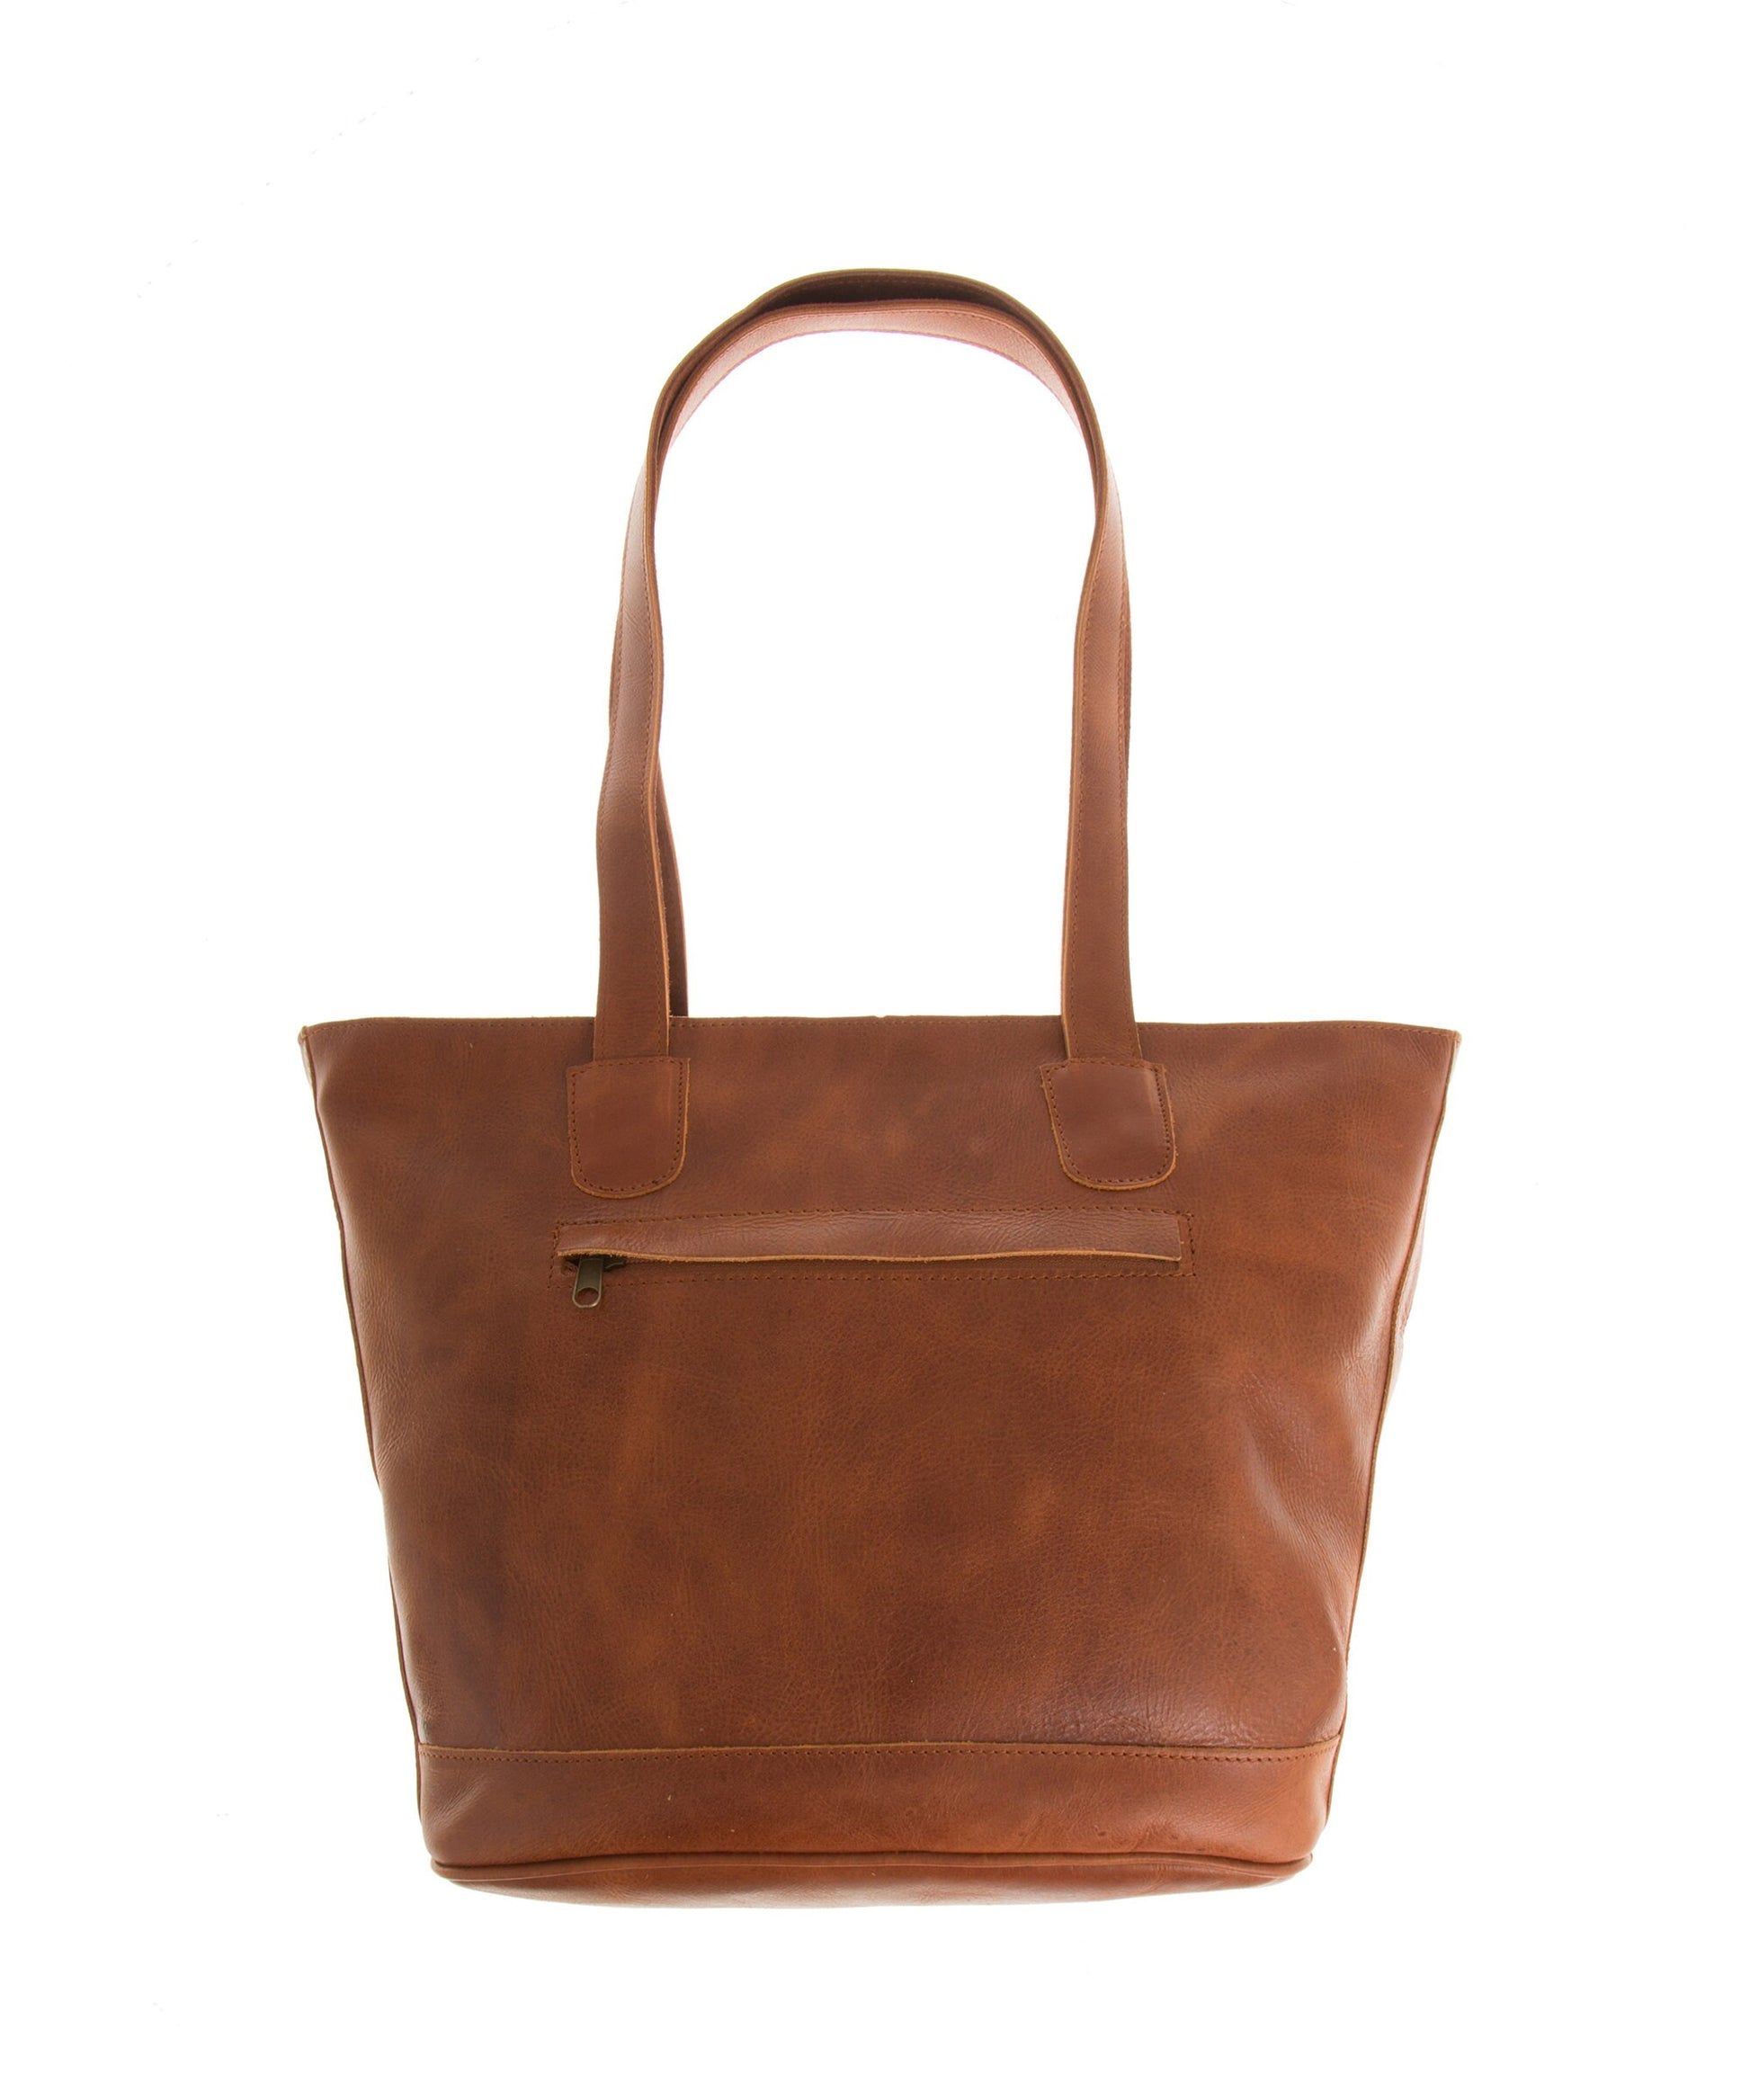 Leather tote bag for women with zipper, Leather Laptop Tote, Genuine Leather Tote Bag